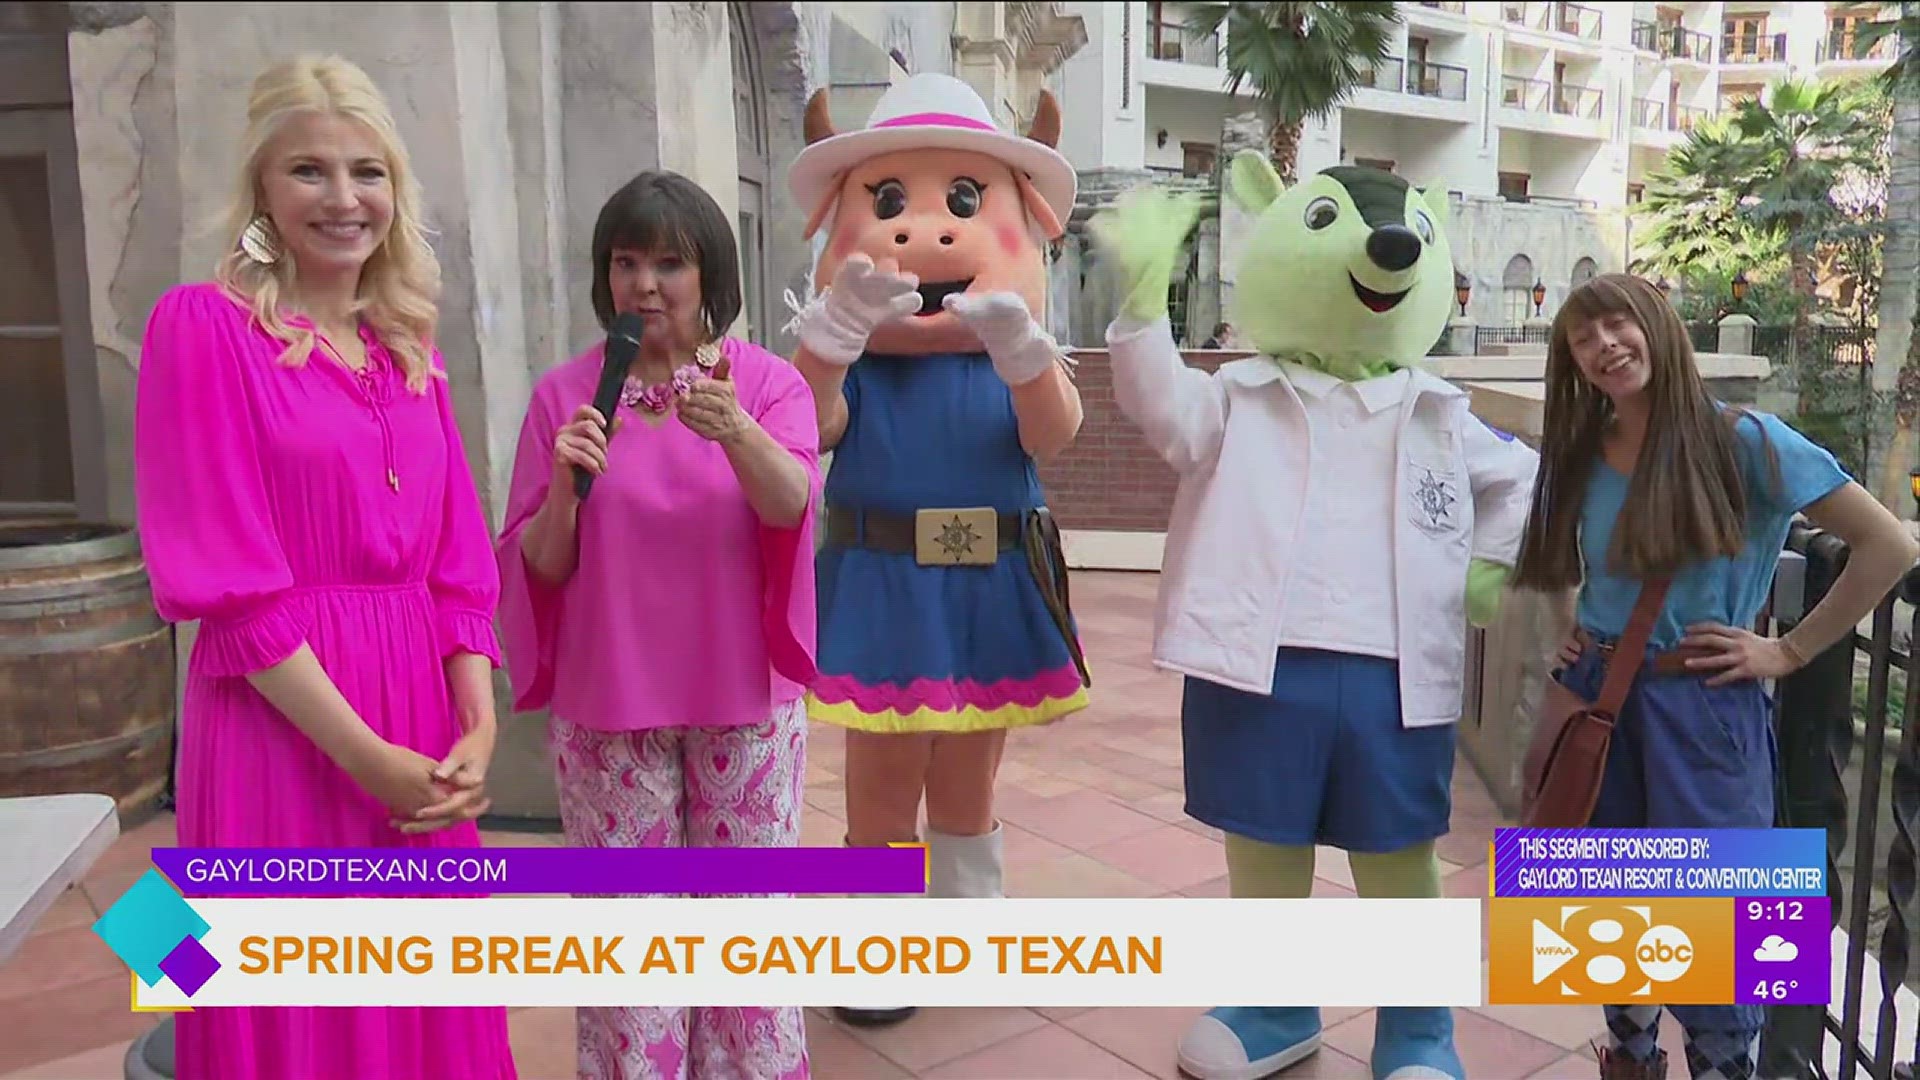 Paige discovers fun for your whole family. This segment is sponsored by Gaylord Texan Resort & Convention Center. Go to gaylordtexan.com for more information.